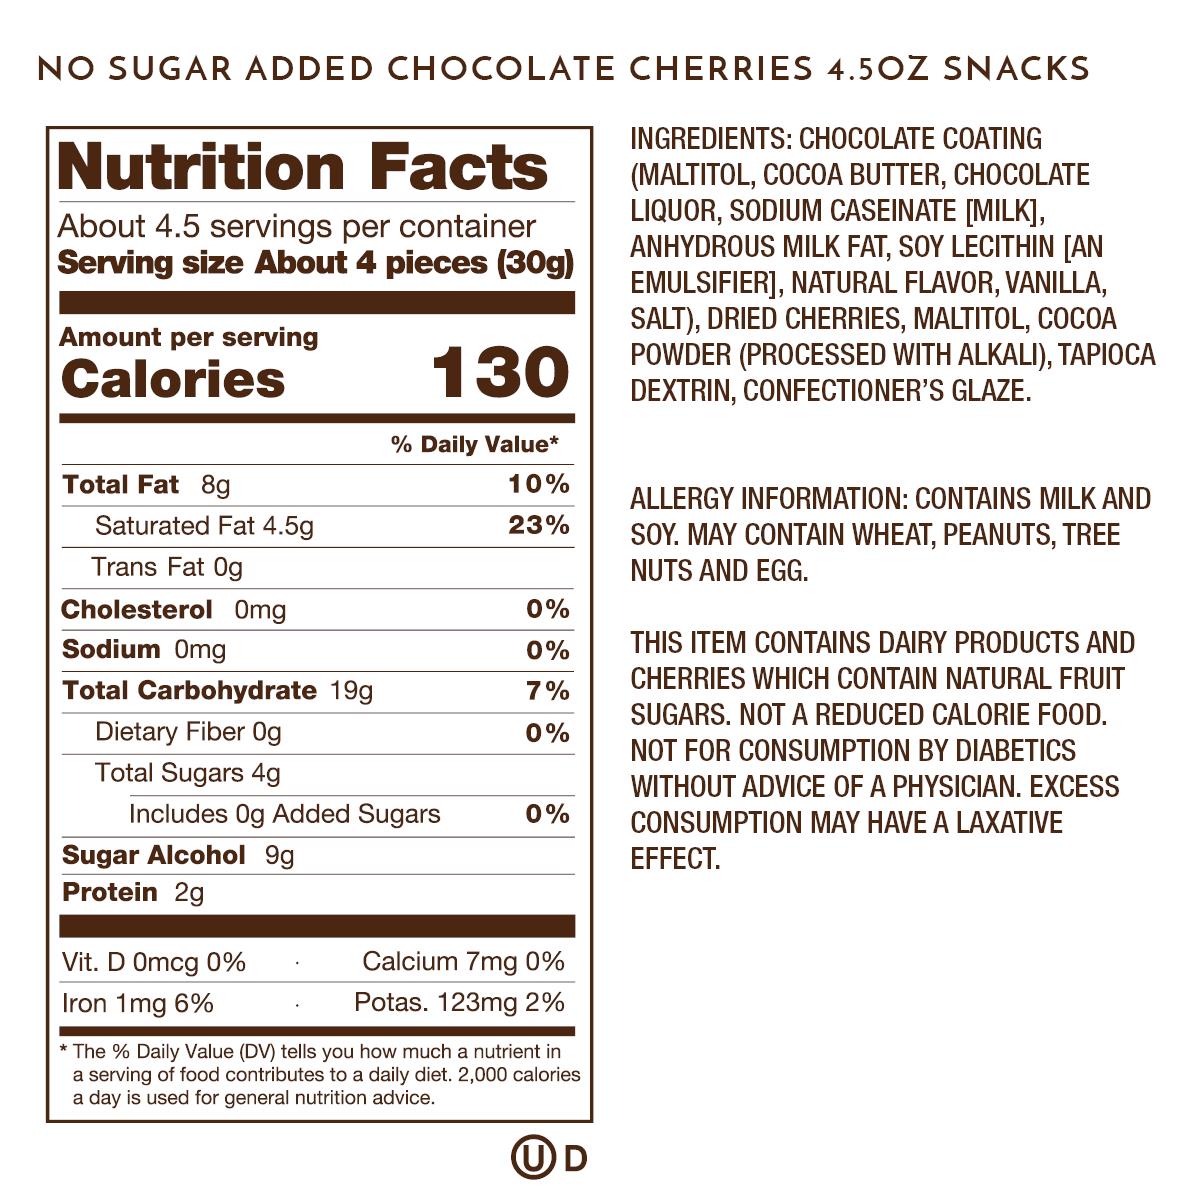 Nutrition Facts, Allergy and Ingredients on every pre-made box.